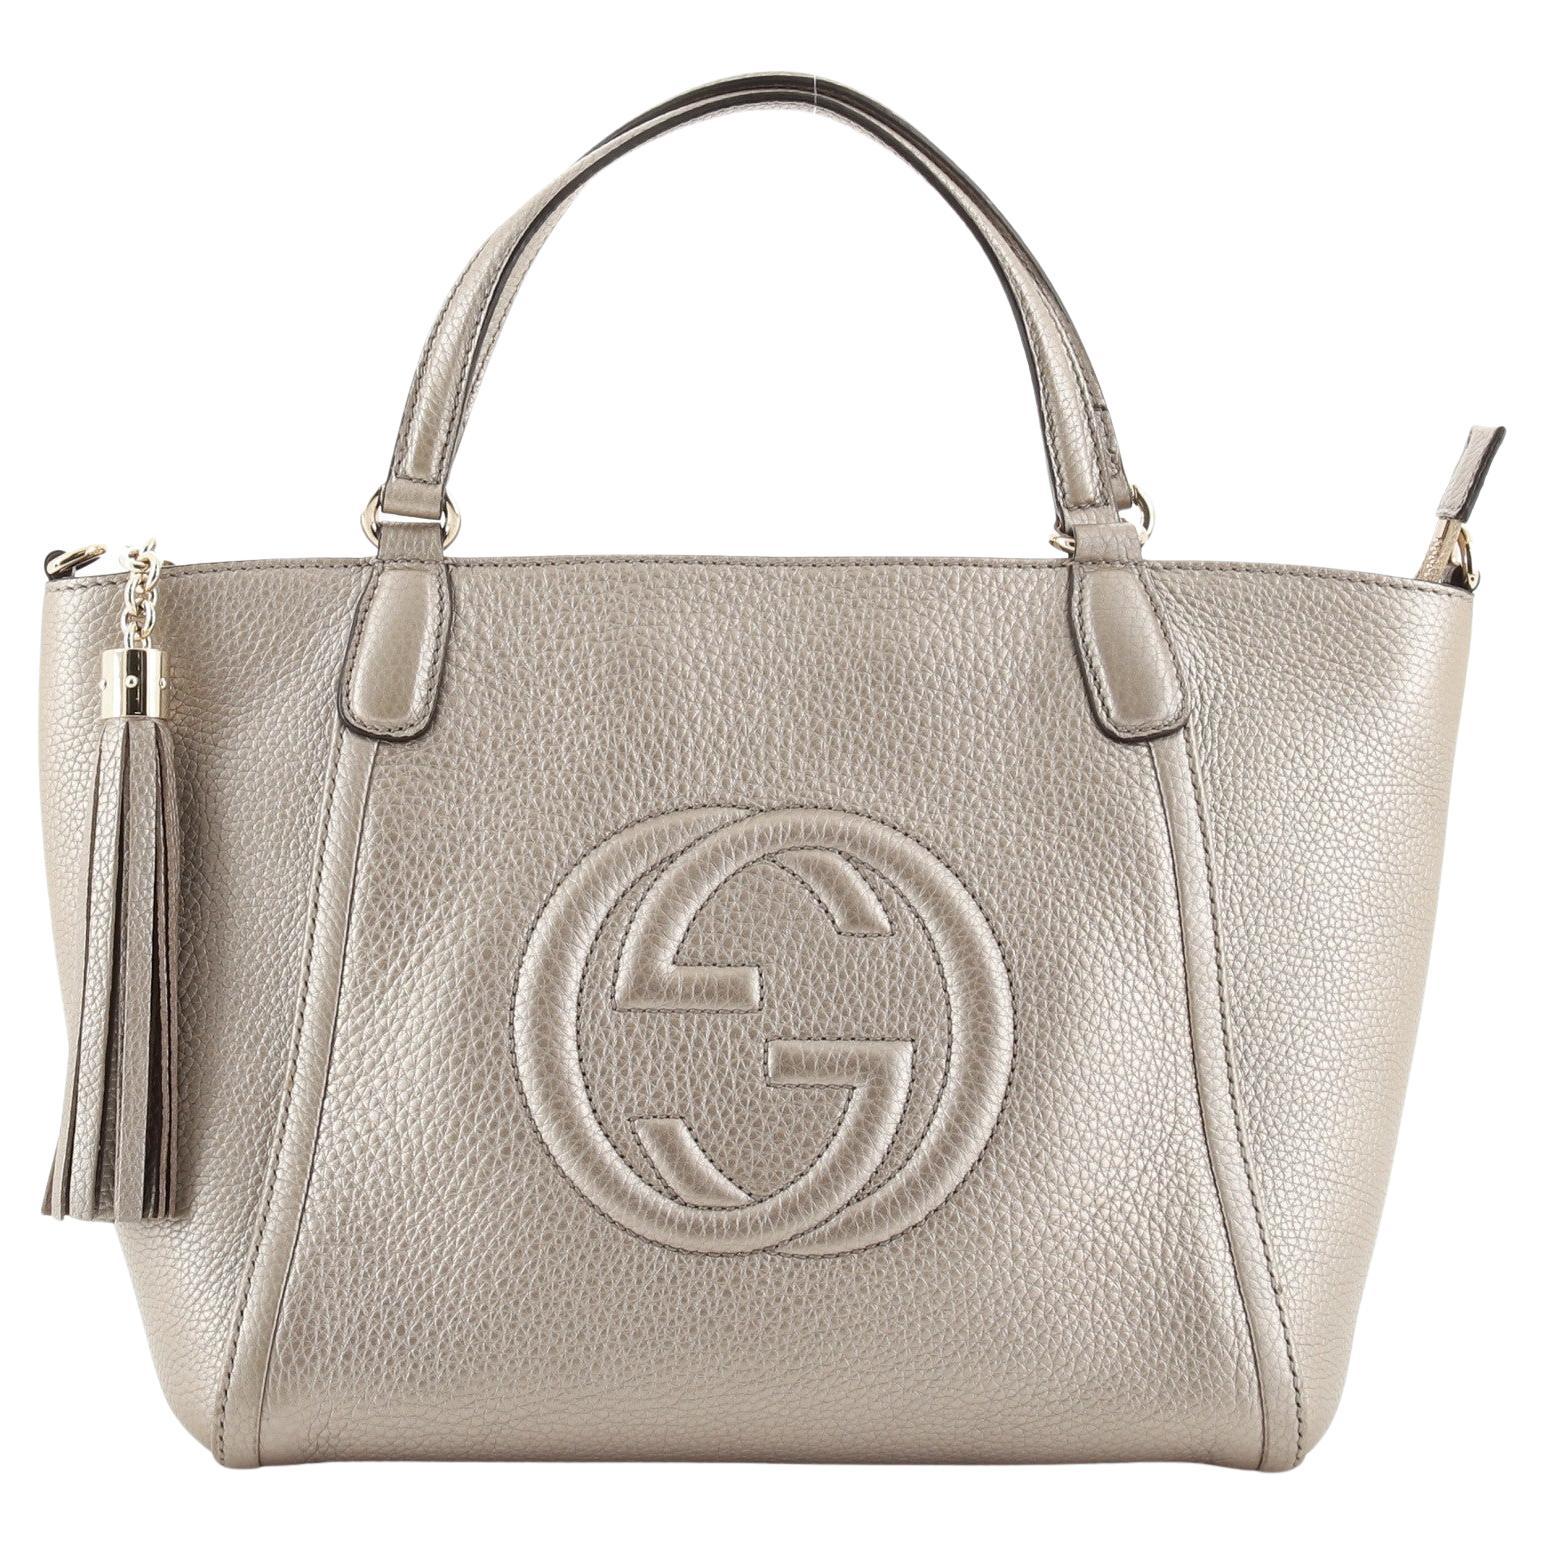 Gucci Soho Convertible Top Handle Bag Leather Small